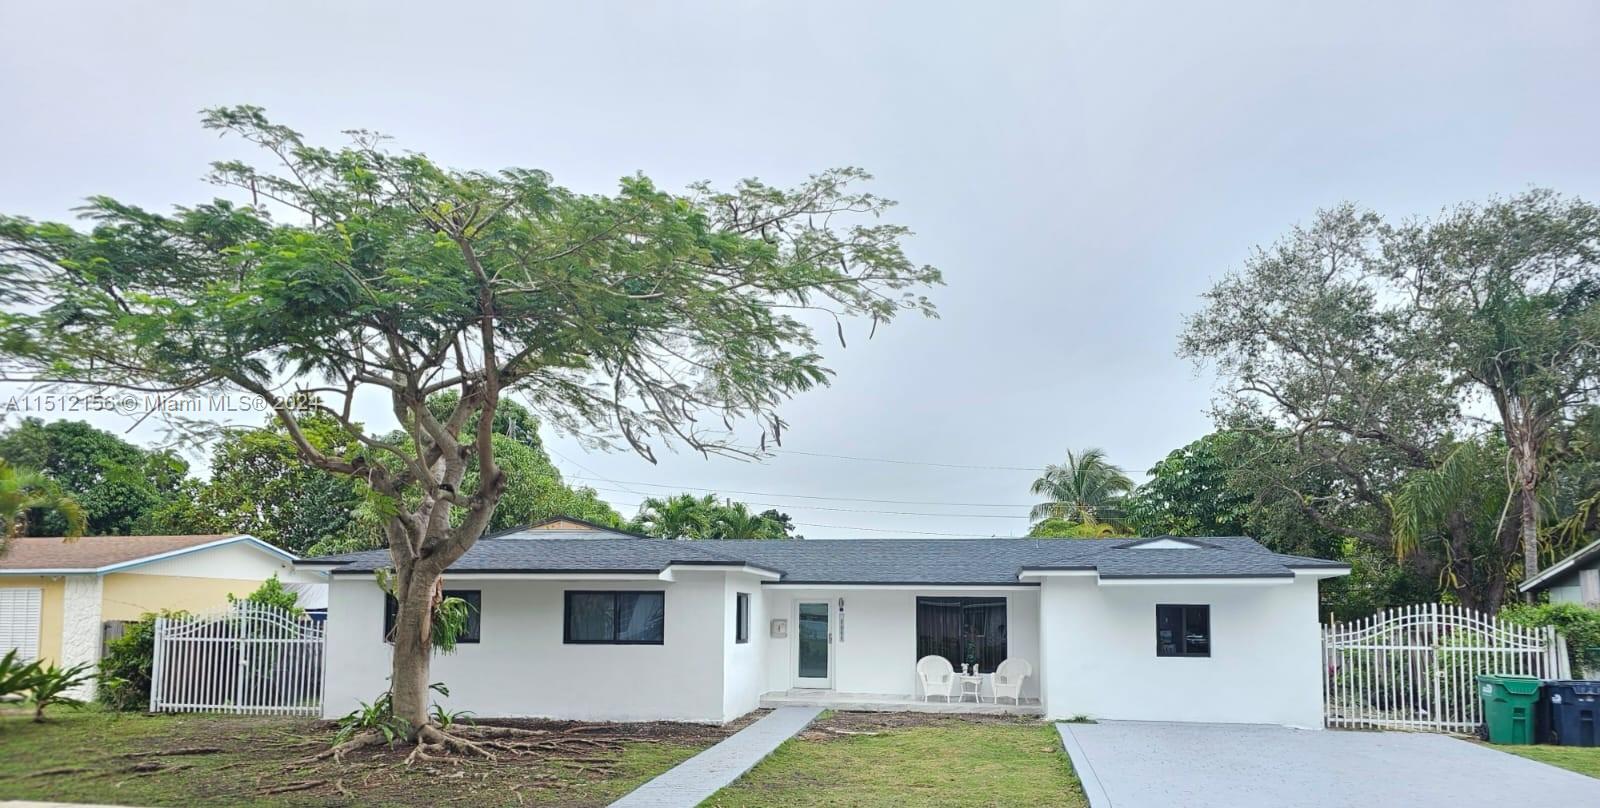 Property for Sale at 10364 Fairway Heights Blvd Blvd, Miami, Broward County, Florida - Bedrooms: 4 
Bathrooms: 3  - $710,000